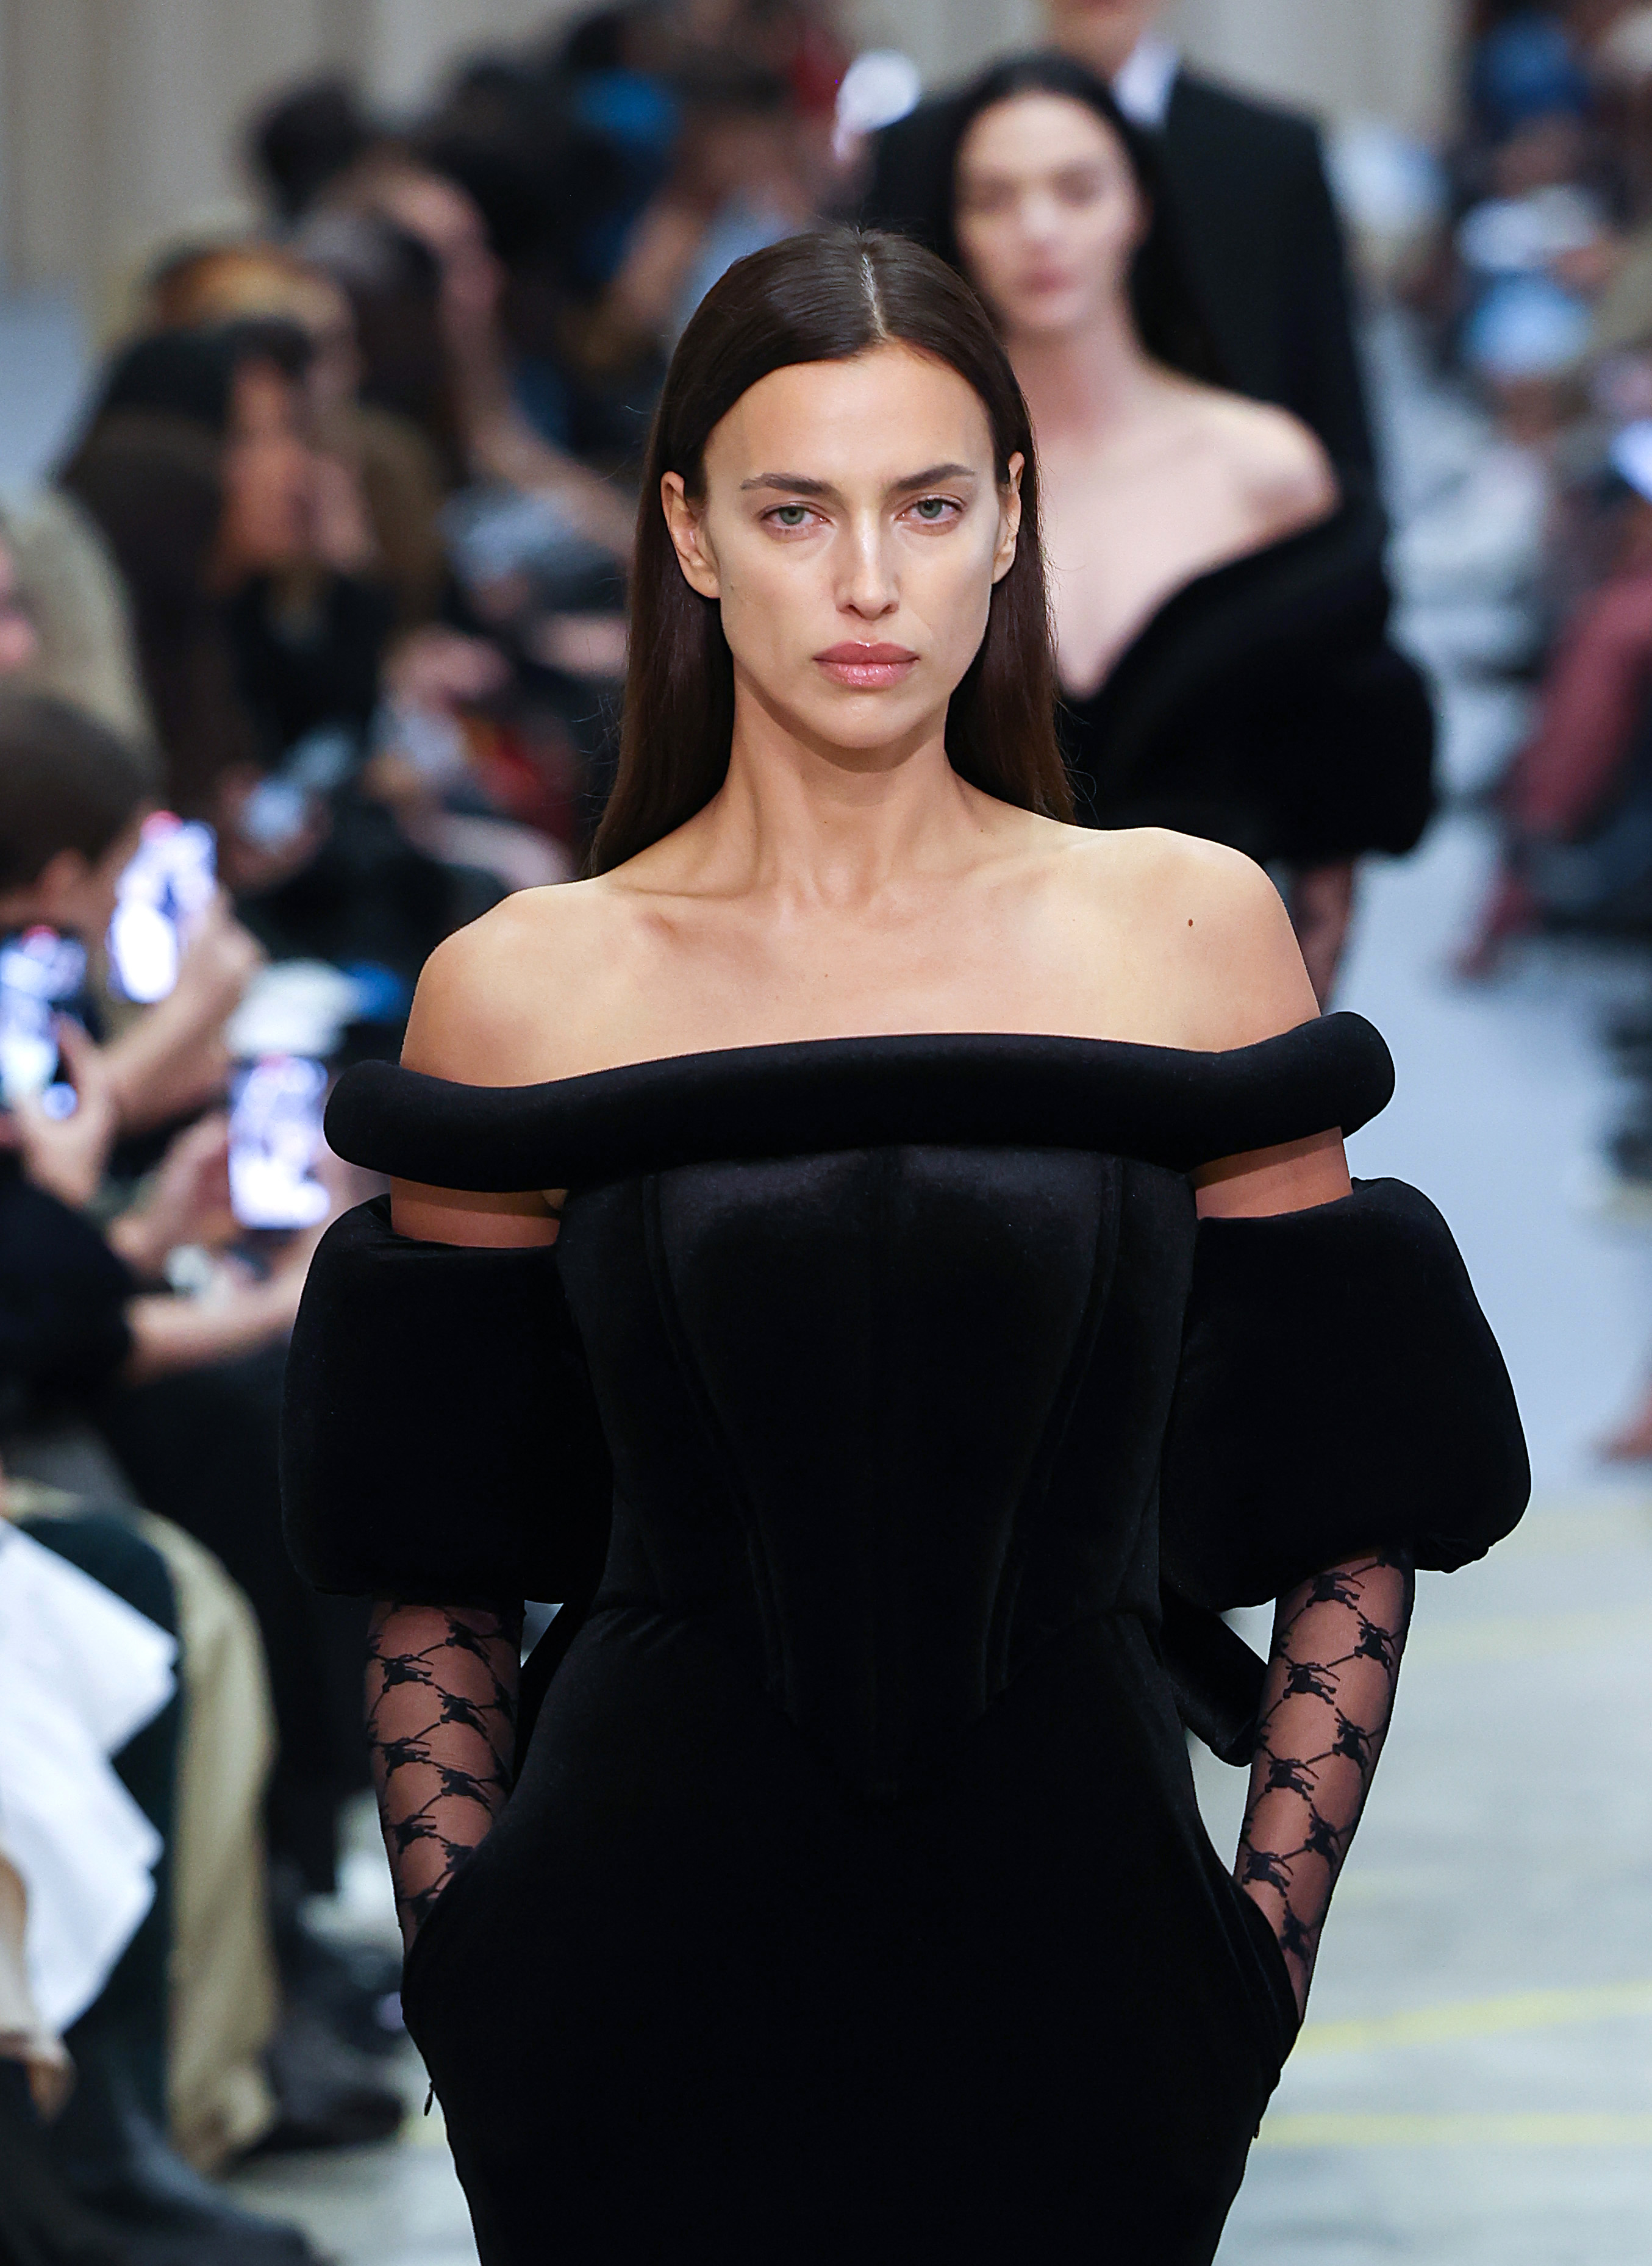 Close-up of Irina modeling an off-the-shoulder outfit